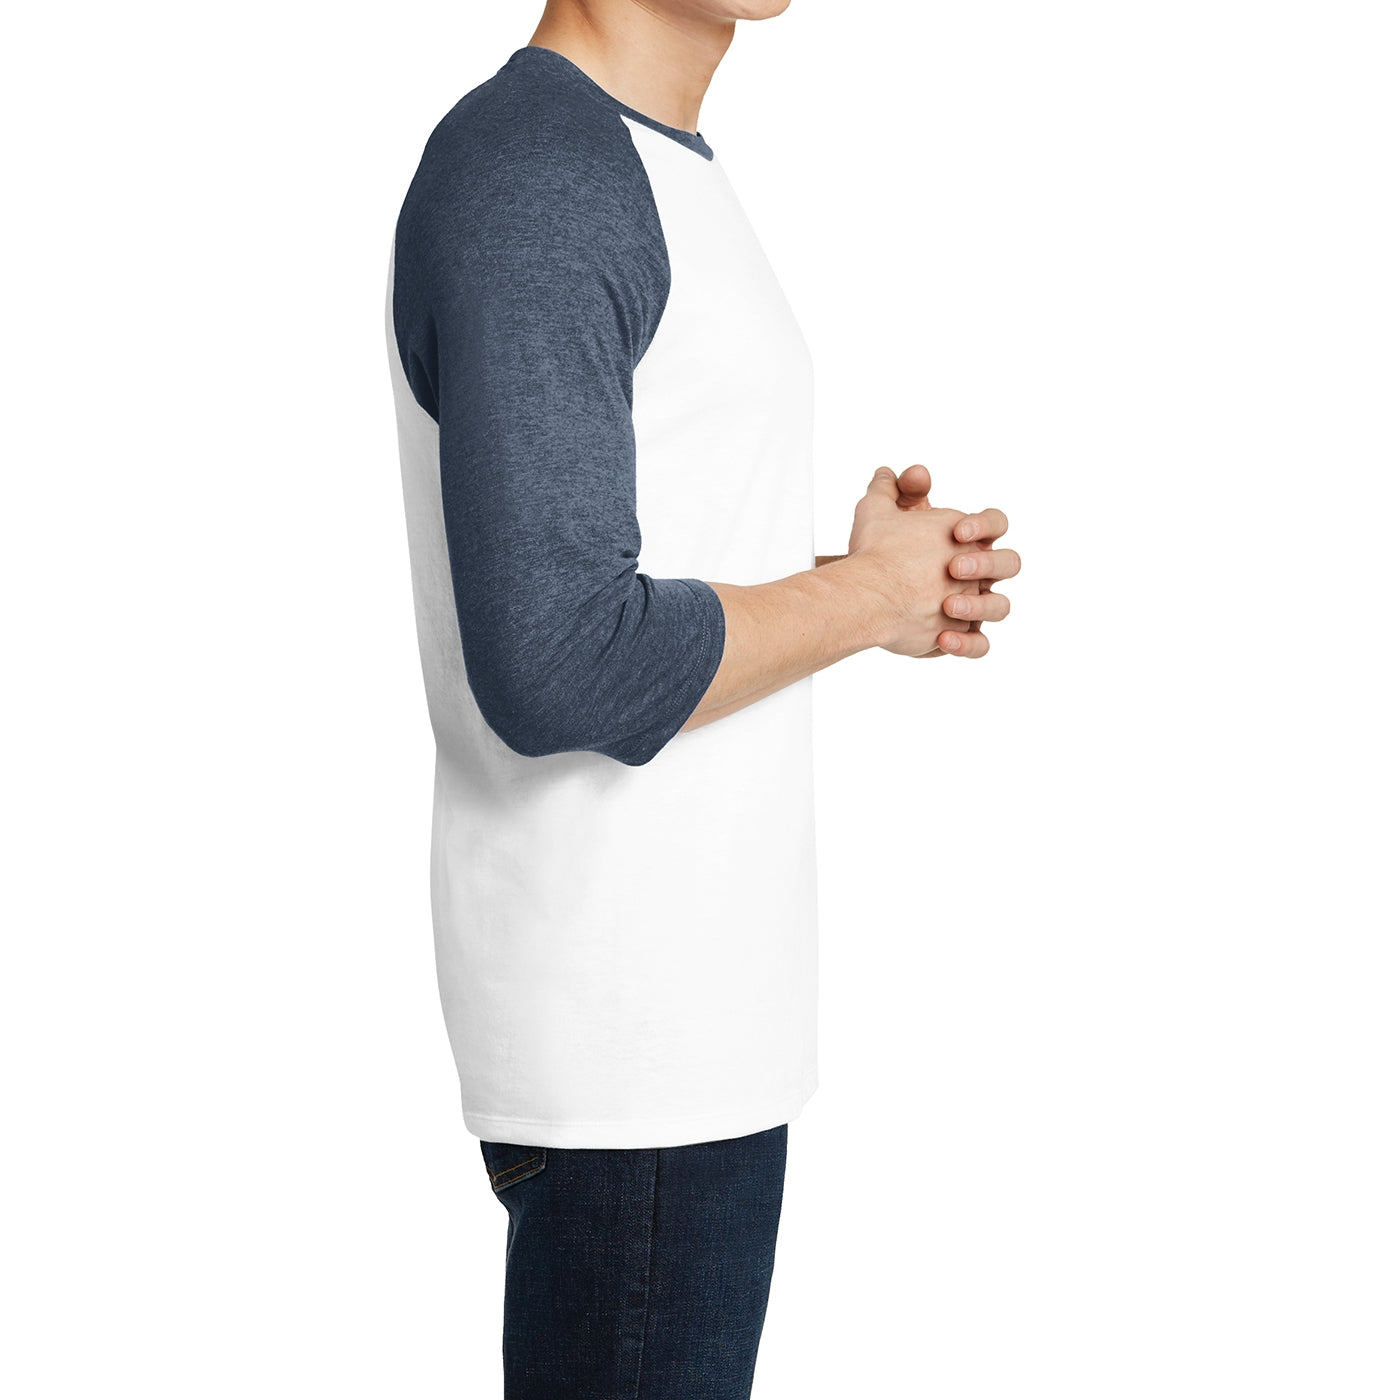 Men's Young  Very Important Tee 3/4-Sleeve Raglan - Heathered Navy/ White